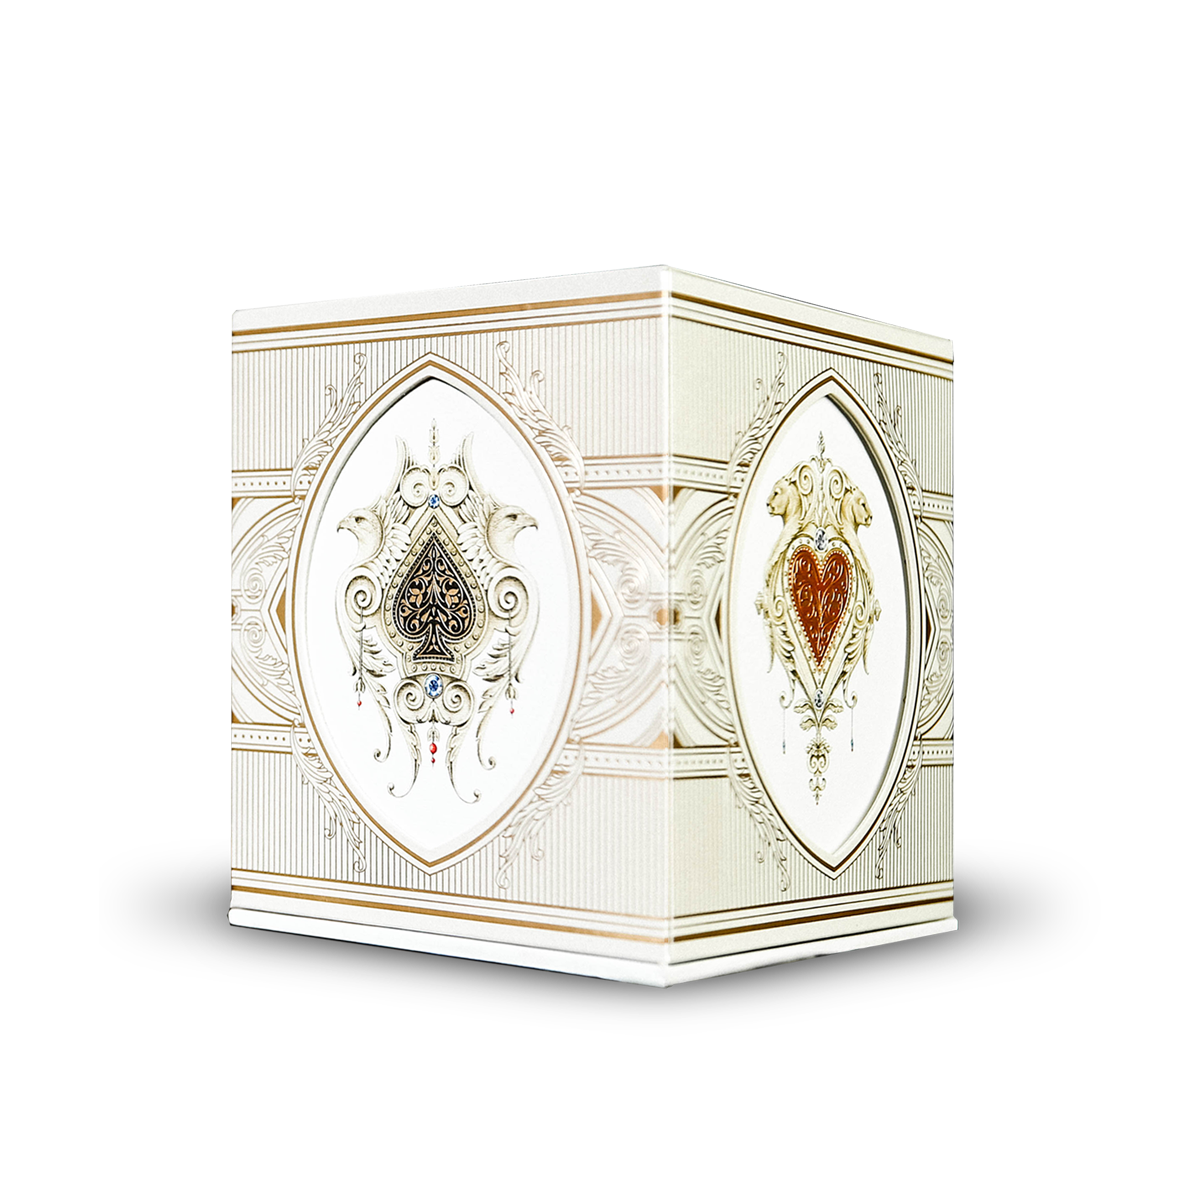 Kingdom Playing Cards by ARK